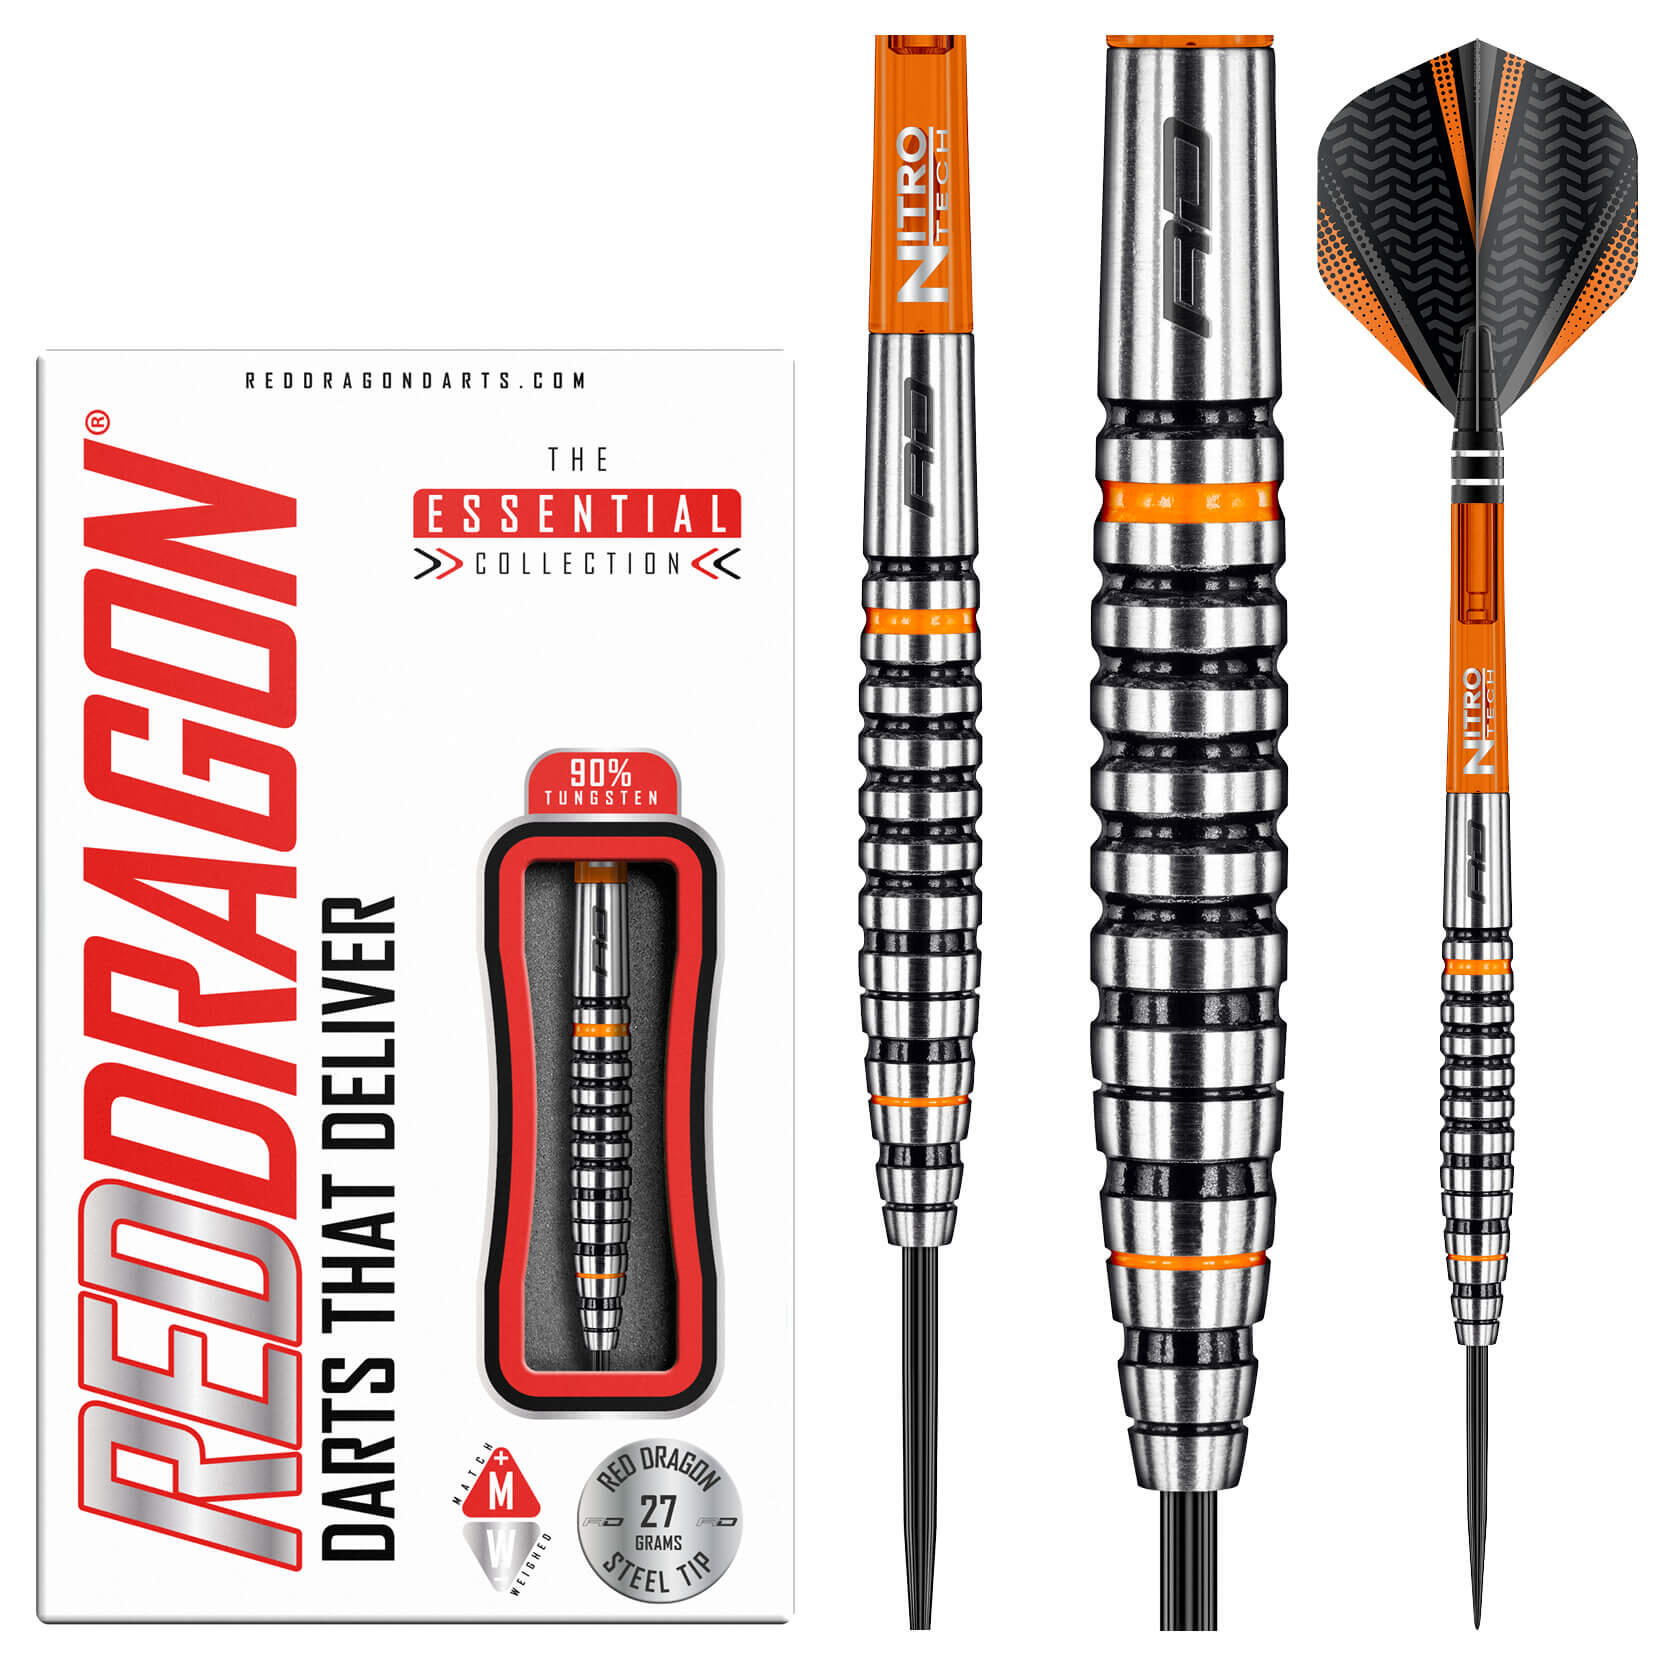 RED DRAGON DARTS Amberjack 14: 27g Tungsten Darts Set with Flights and Stems